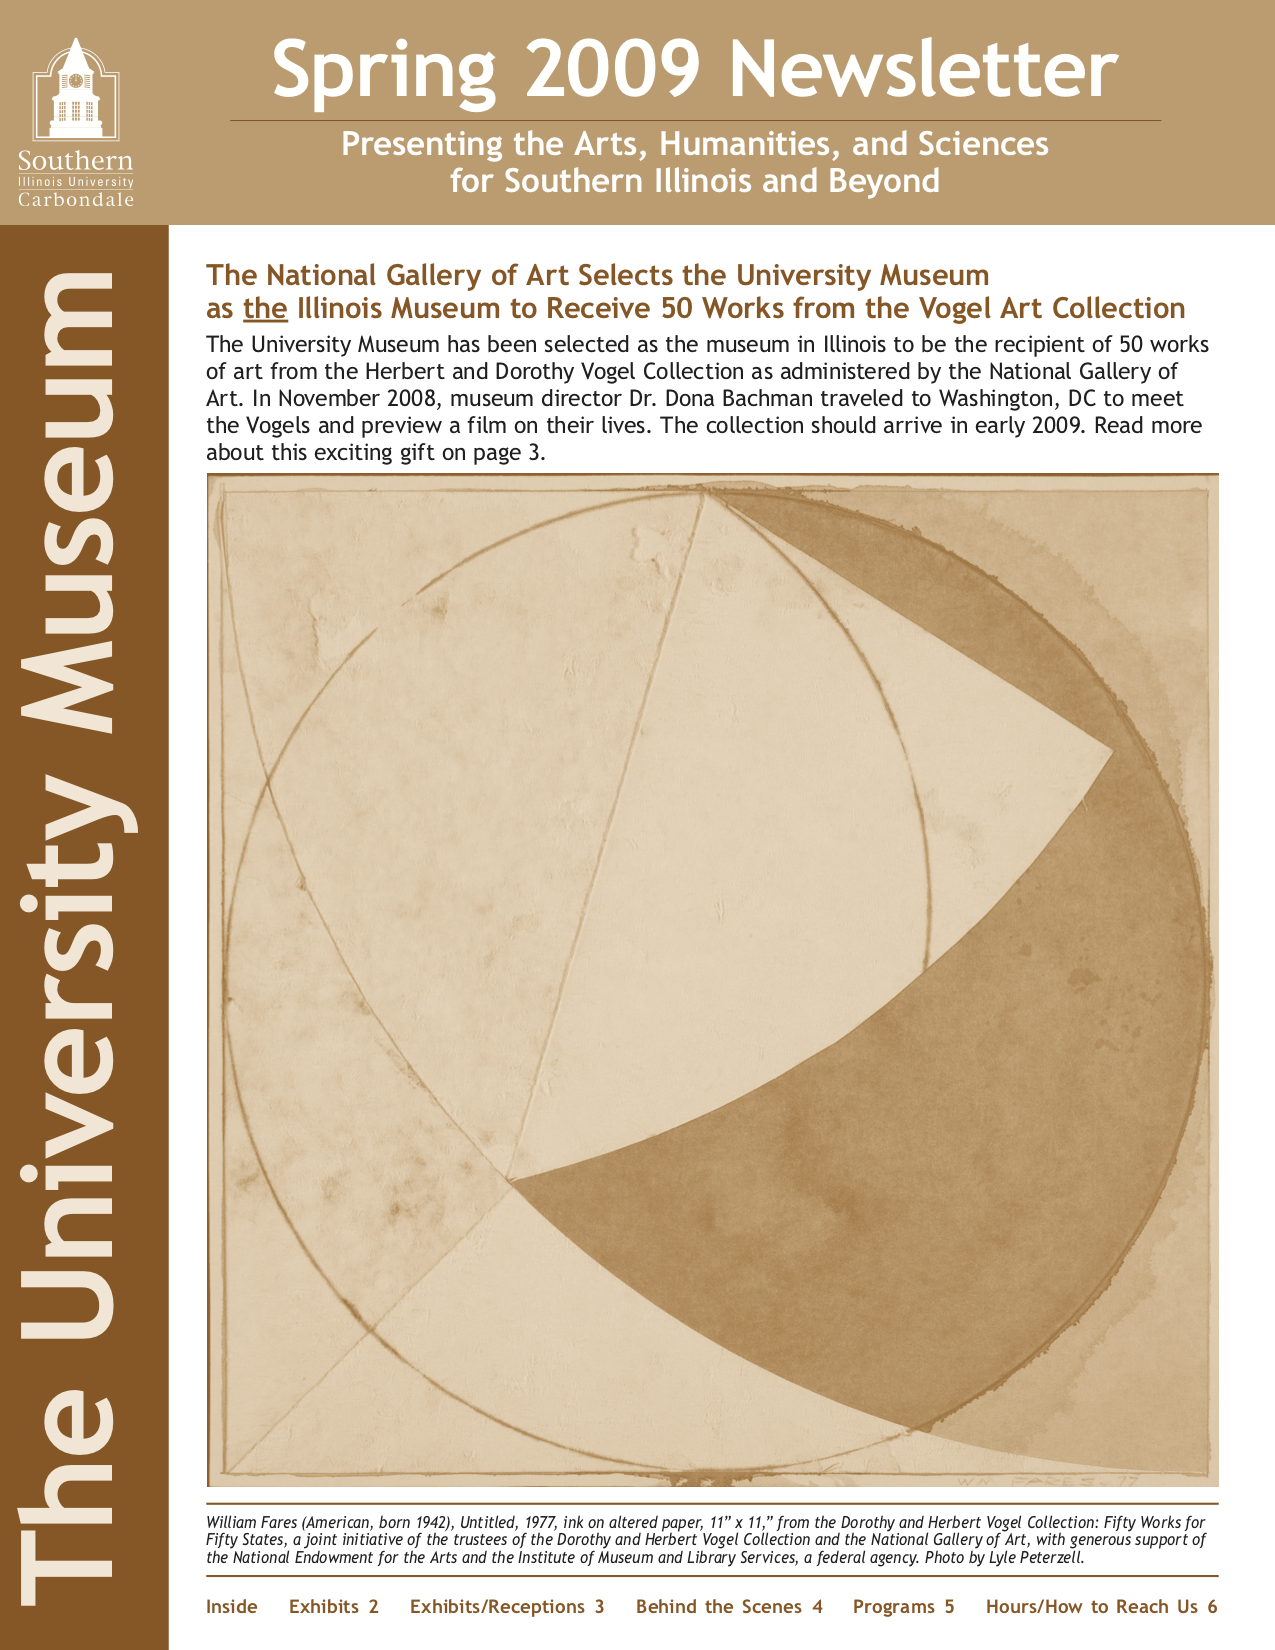 Southern Illinois University Museum, Newsletter on Fifty Works for Fifty States, 2009